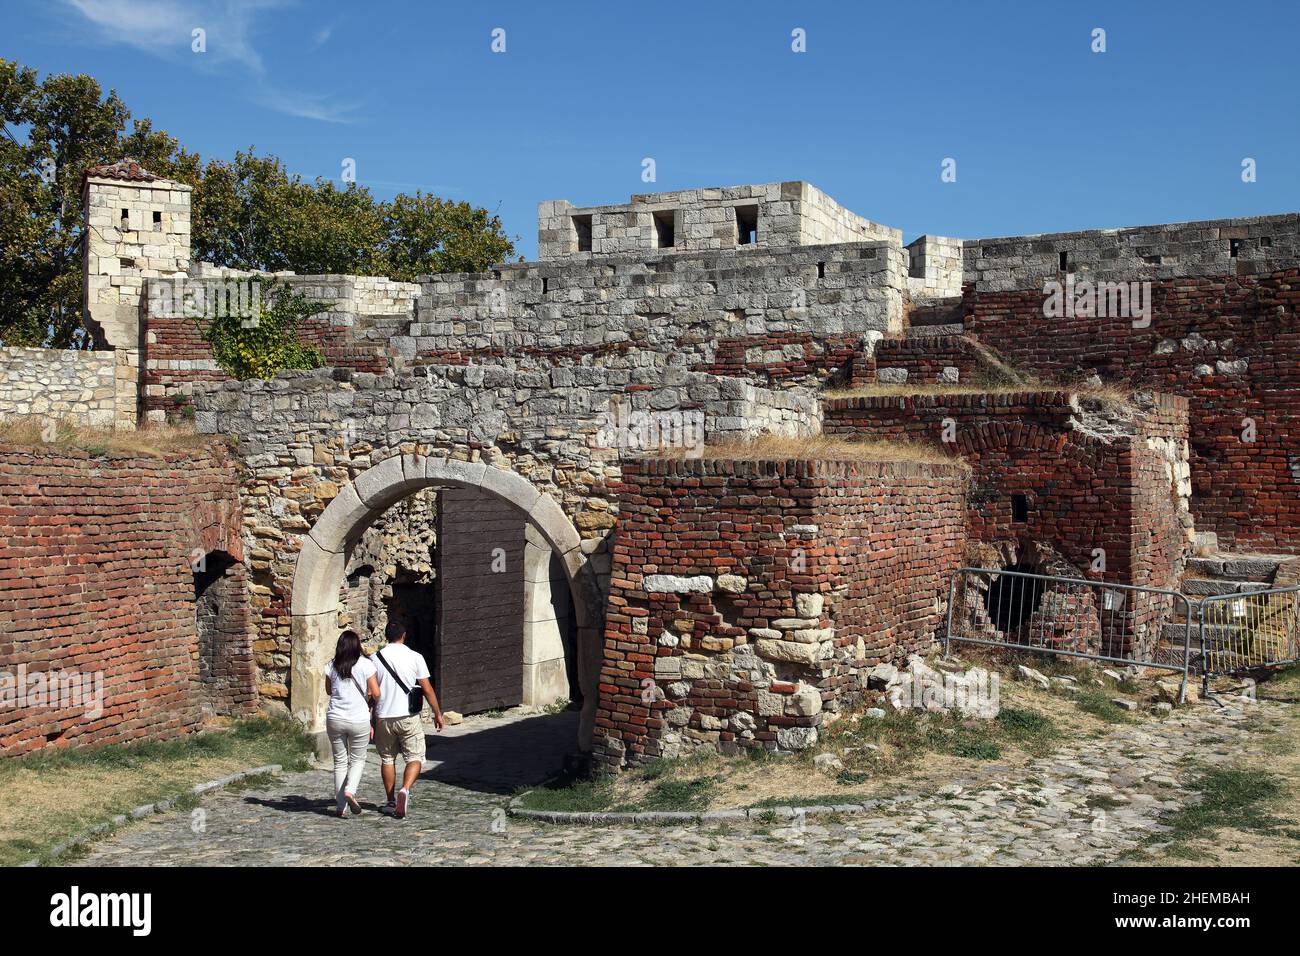 People walking at Kalemegdan Fortress Gate in Belgrade, Serbia. Belgrade is the capital city of Serbia and largest cities of Southeastern Europe. Stock Photo